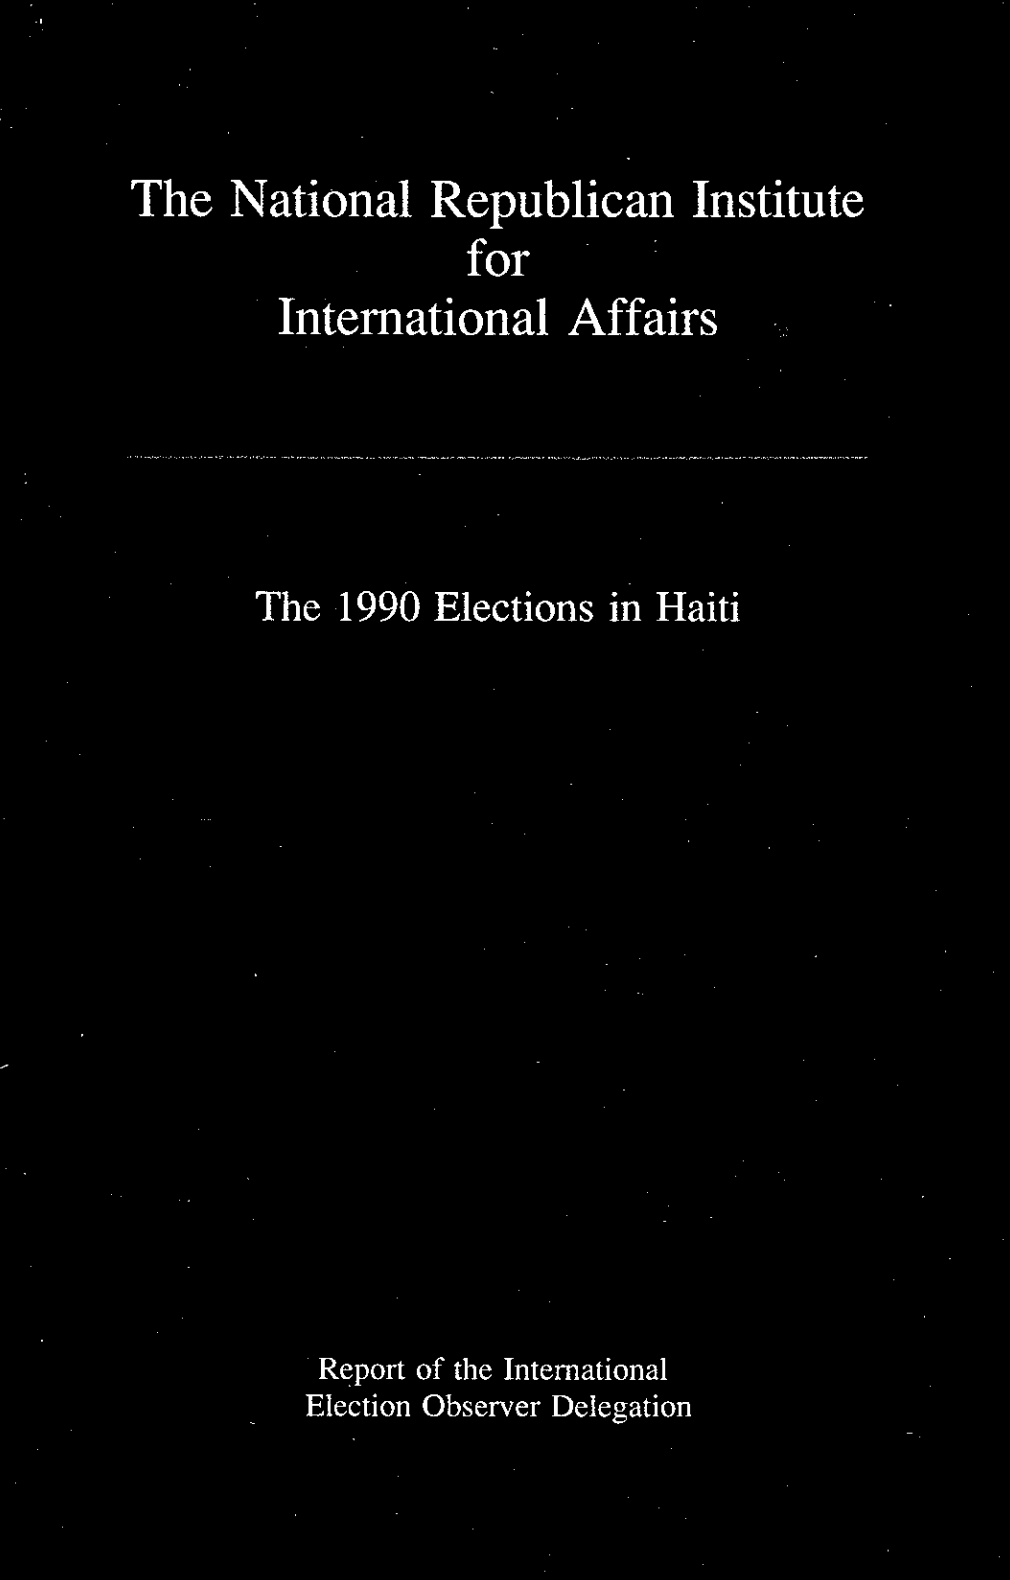 The 1990 Elections in Haiti: Report of the International Election Observer Delegation